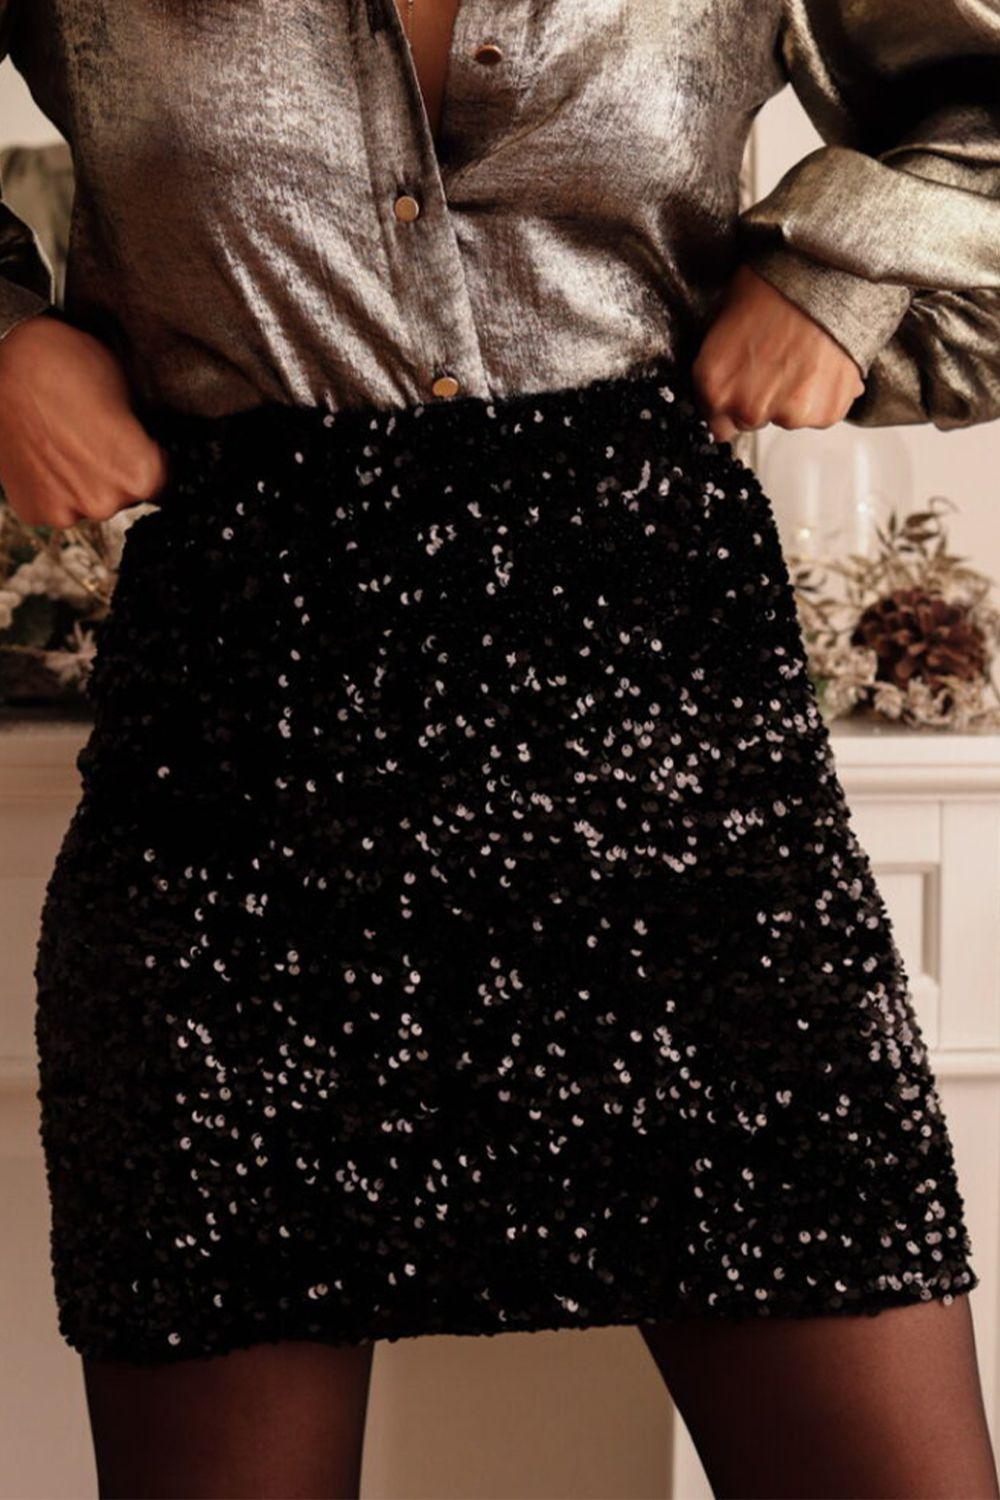 a woman in a metallic shirt and black sequin skirt